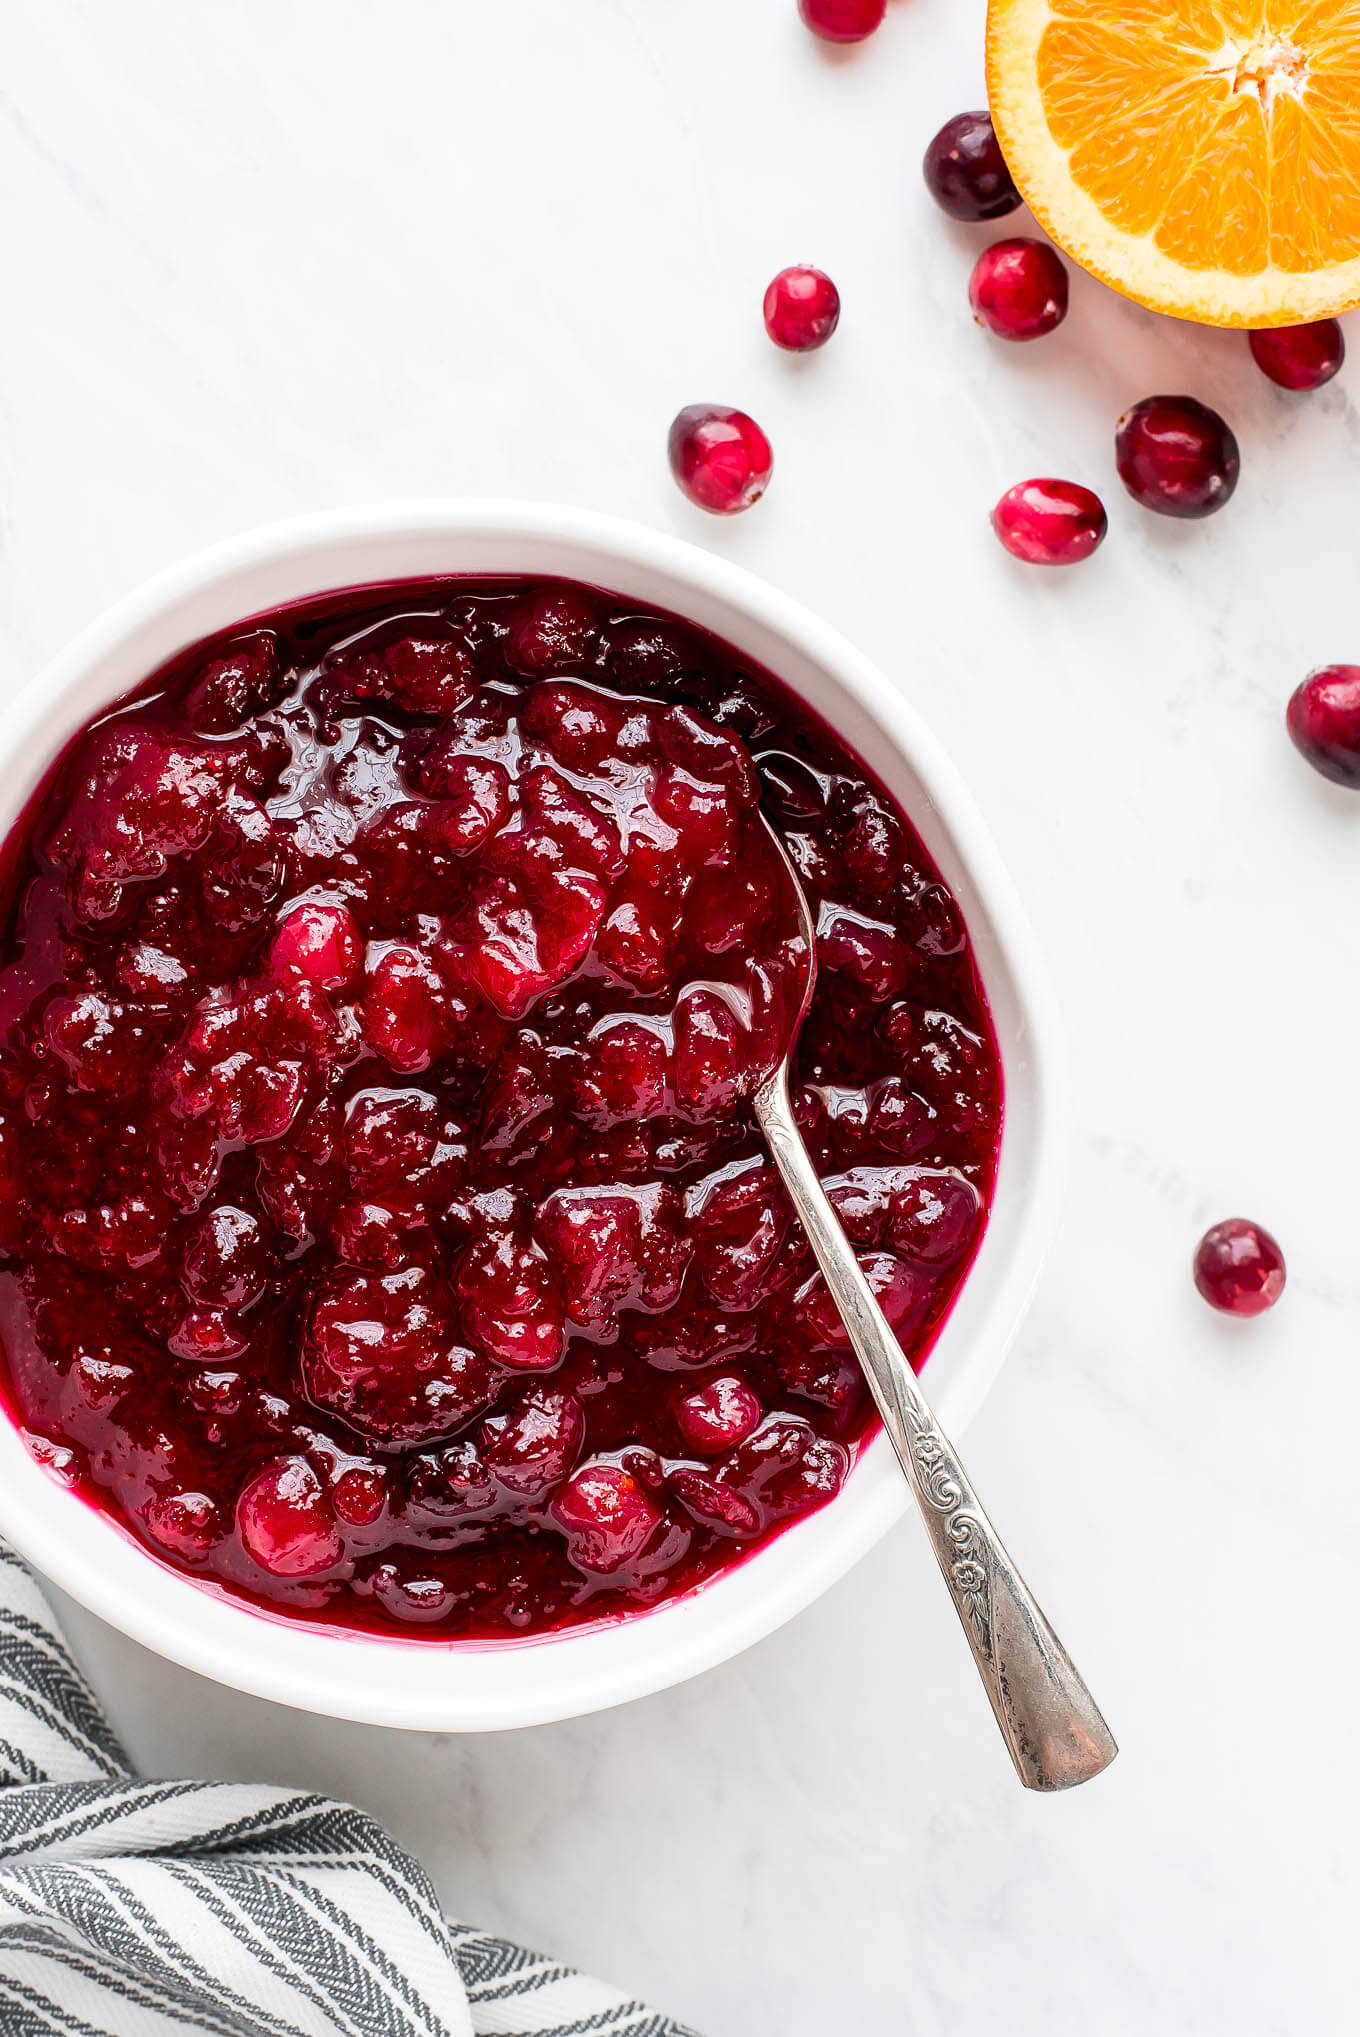 Cranberry sauce in a bowl with a spoon and a half orange and cranberries to the side.